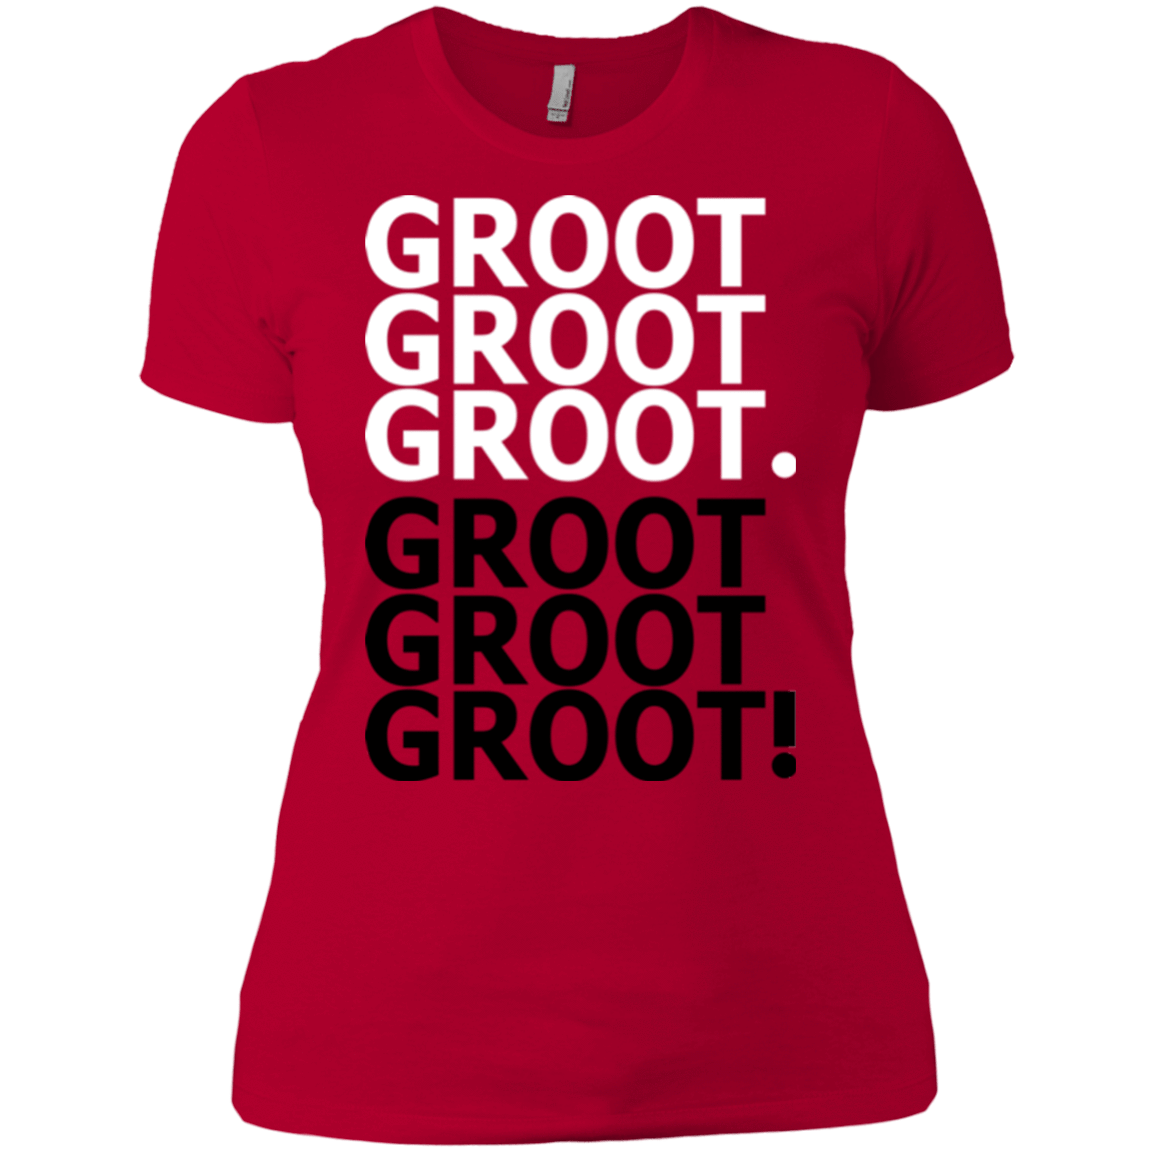 T-Shirts Red / X-Small Get over it Groot Women's Premium T-Shirt